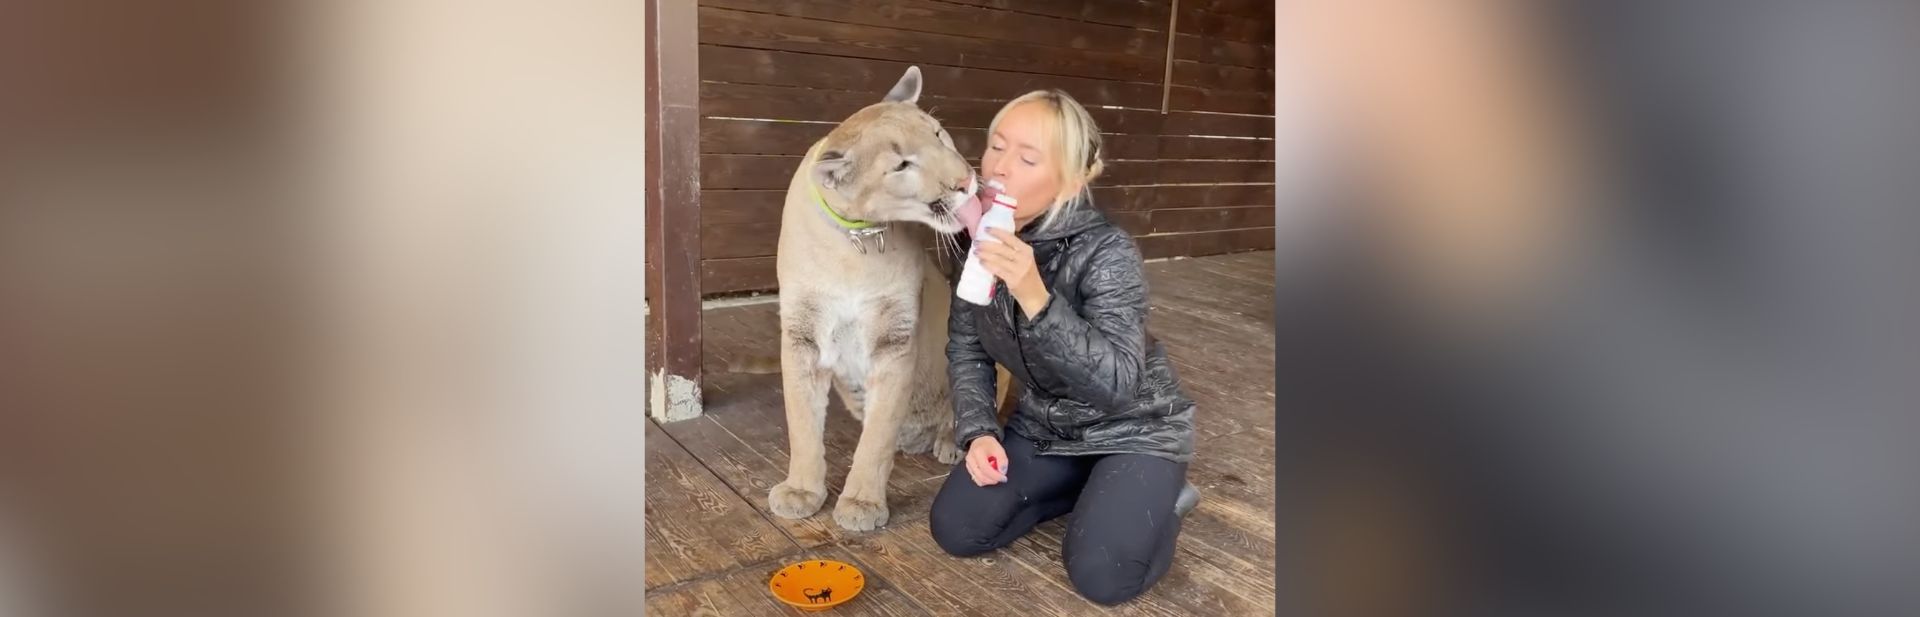 Big Cat Turns Into a Playful Pet in an Unlikely Home